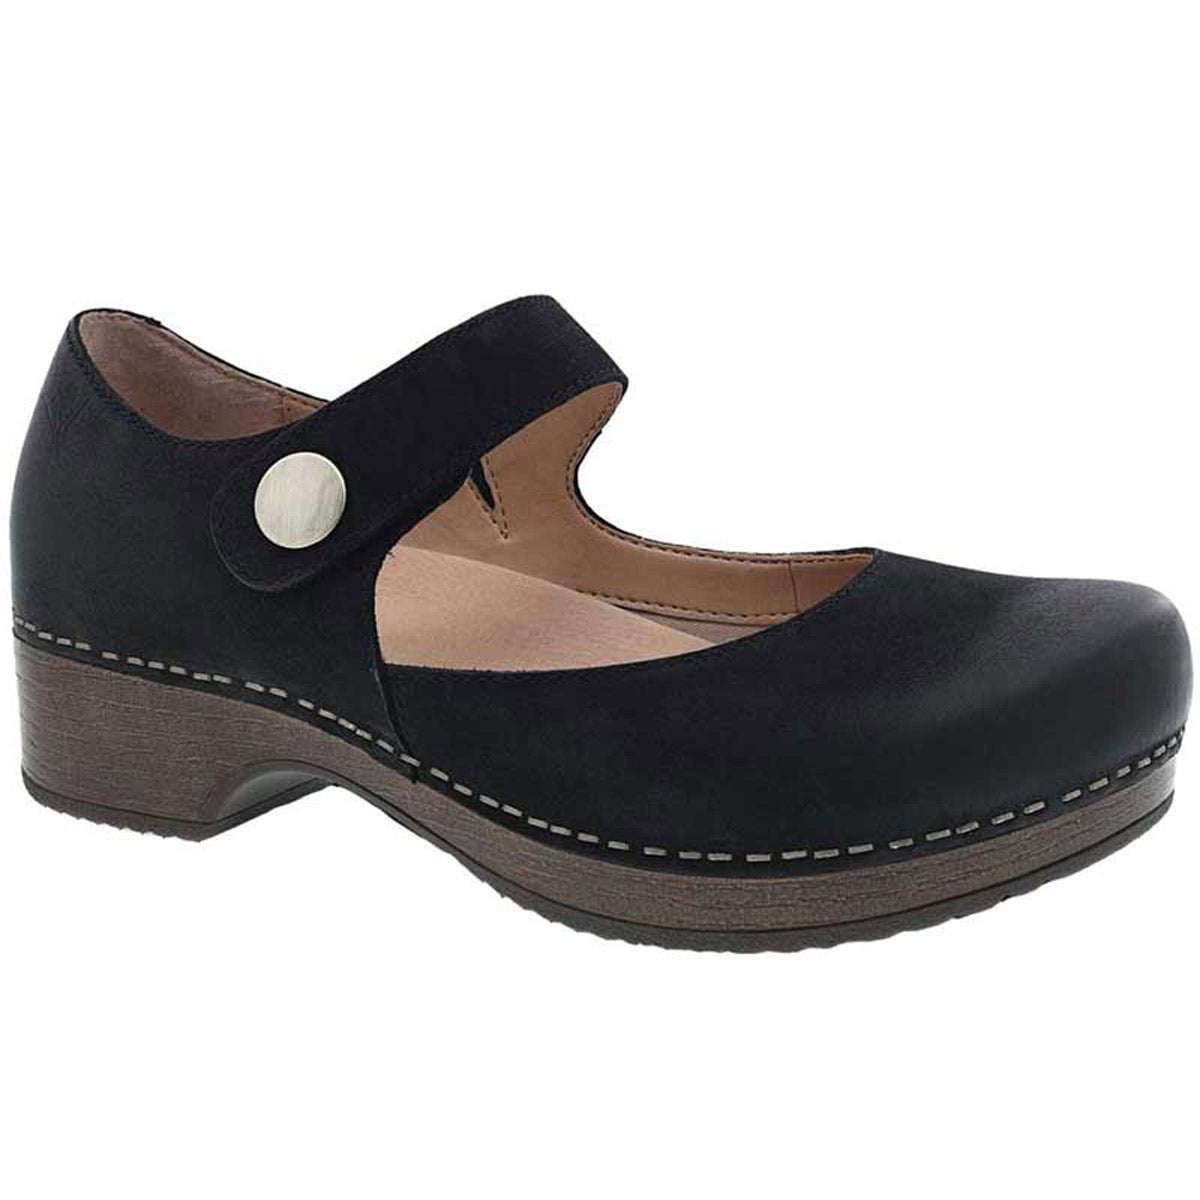 Black Dansko Beatrice Mary Jane style women&#39;s shoe with a strap and button closure on a white background will be replaced with DANSKO BEATRICE BLACK BURNISHED - WOMENS by Dansko.